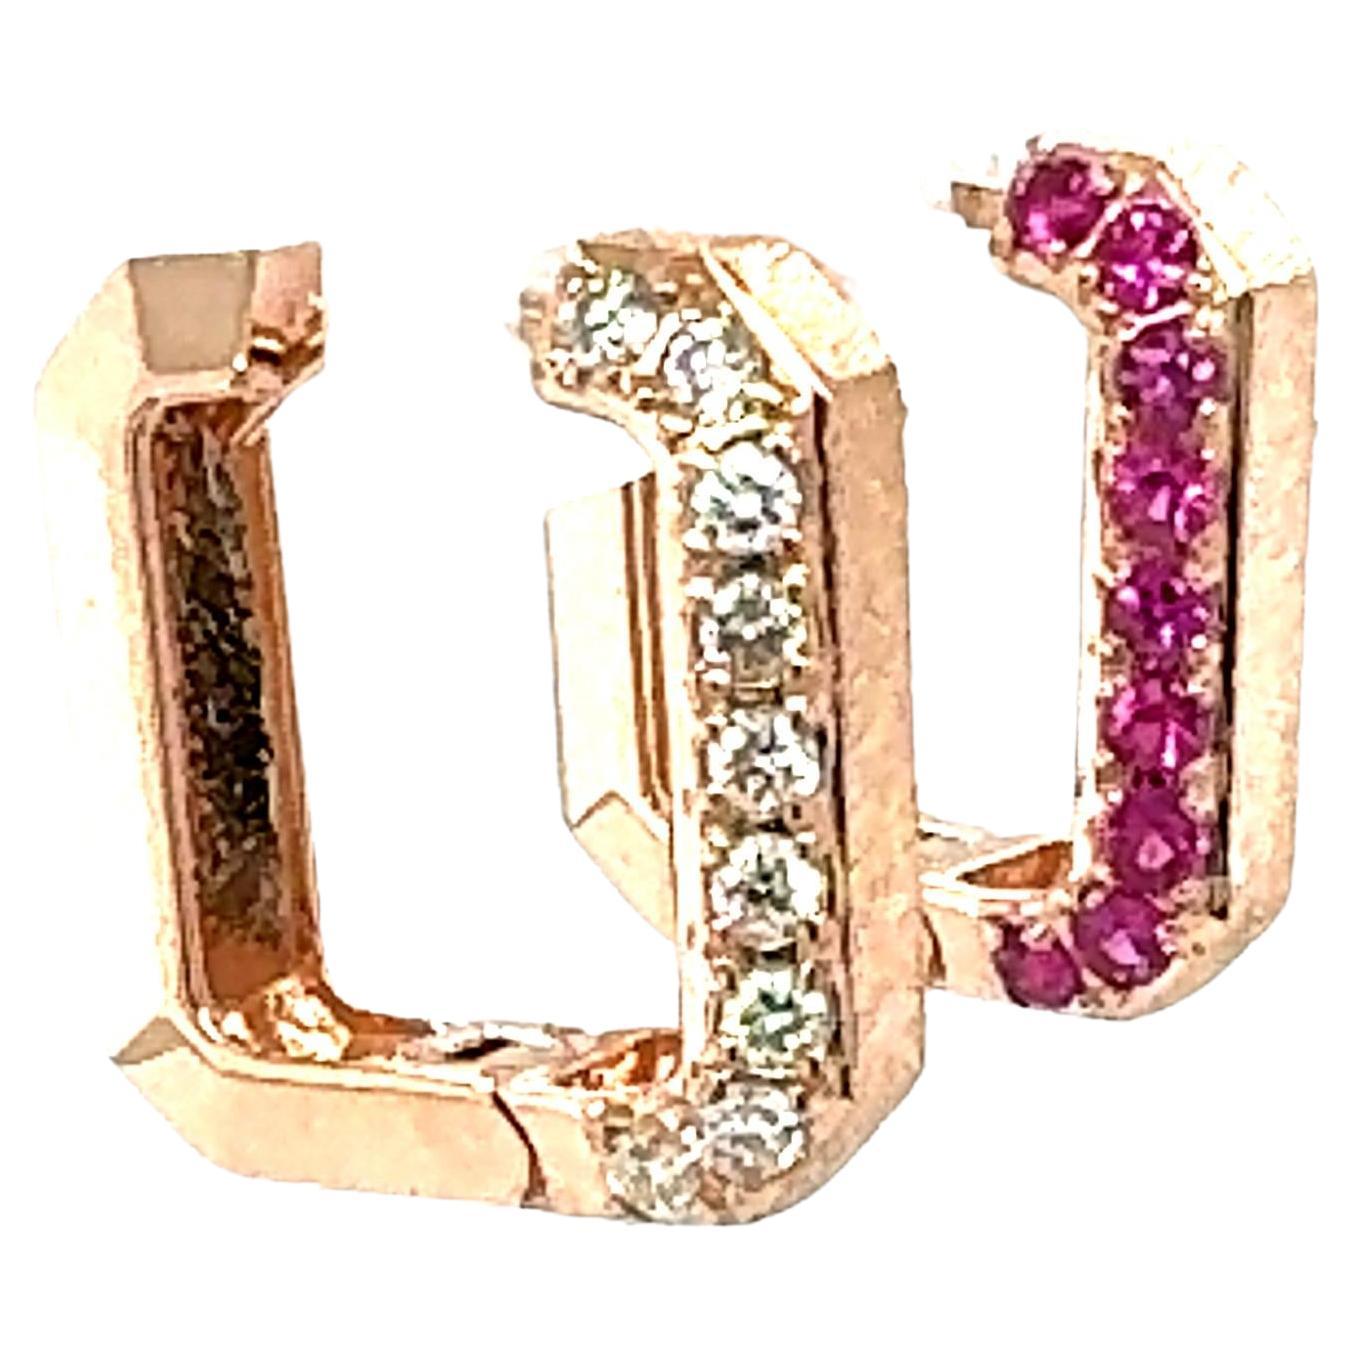 Beautiful and classy Rose Gold Diamond and Pink Sapphire Hoop Earrings

Item Specifics:

18 Natural Round Cut White Diamonds weighing approximately 0.48 carats
Clarity: SI1, Color: F
18 Natural Round Cut Pink Sapphires weighing approximately 0.68